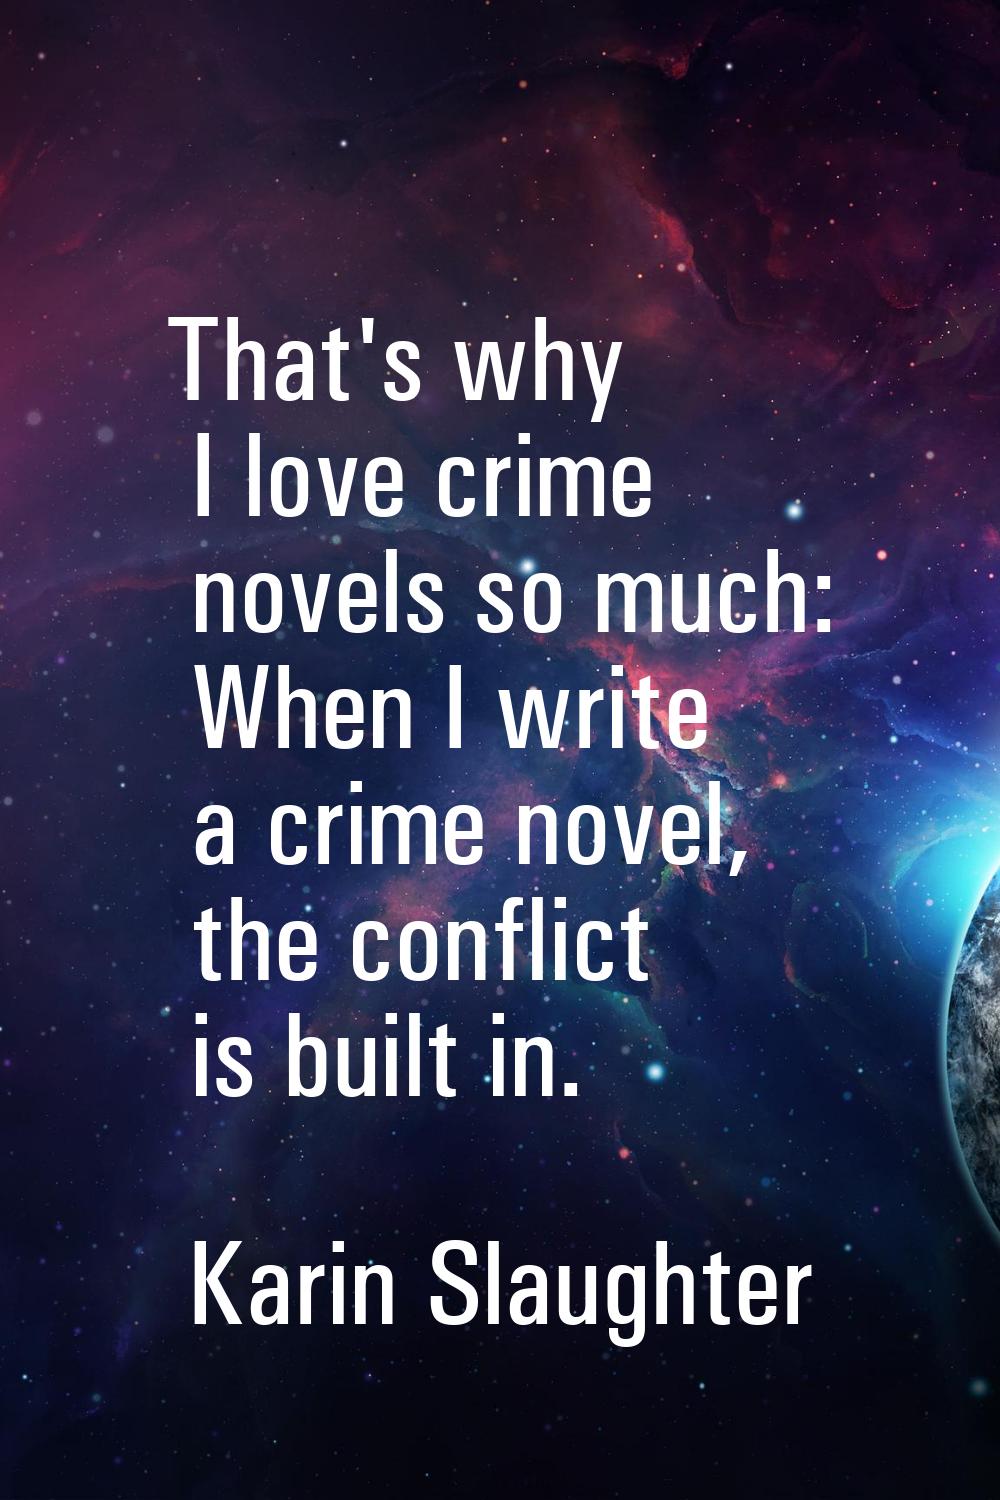 That's why I love crime novels so much: When I write a crime novel, the conflict is built in.